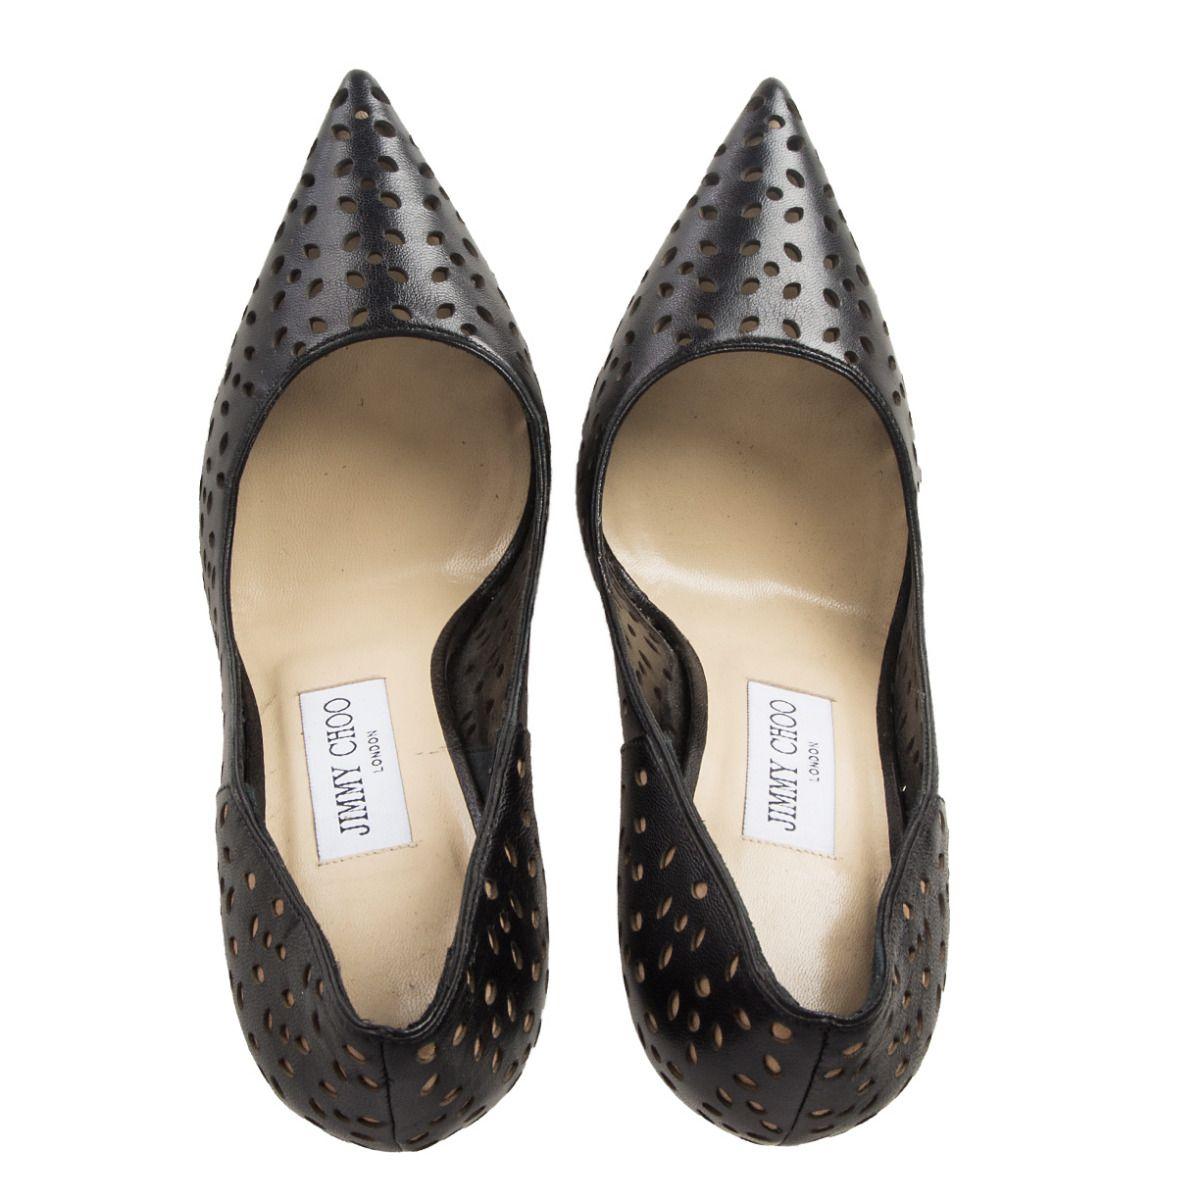 JIMMY CHOO black leather ANOUK Perforated Pumps Shoes 36 For Sale 1